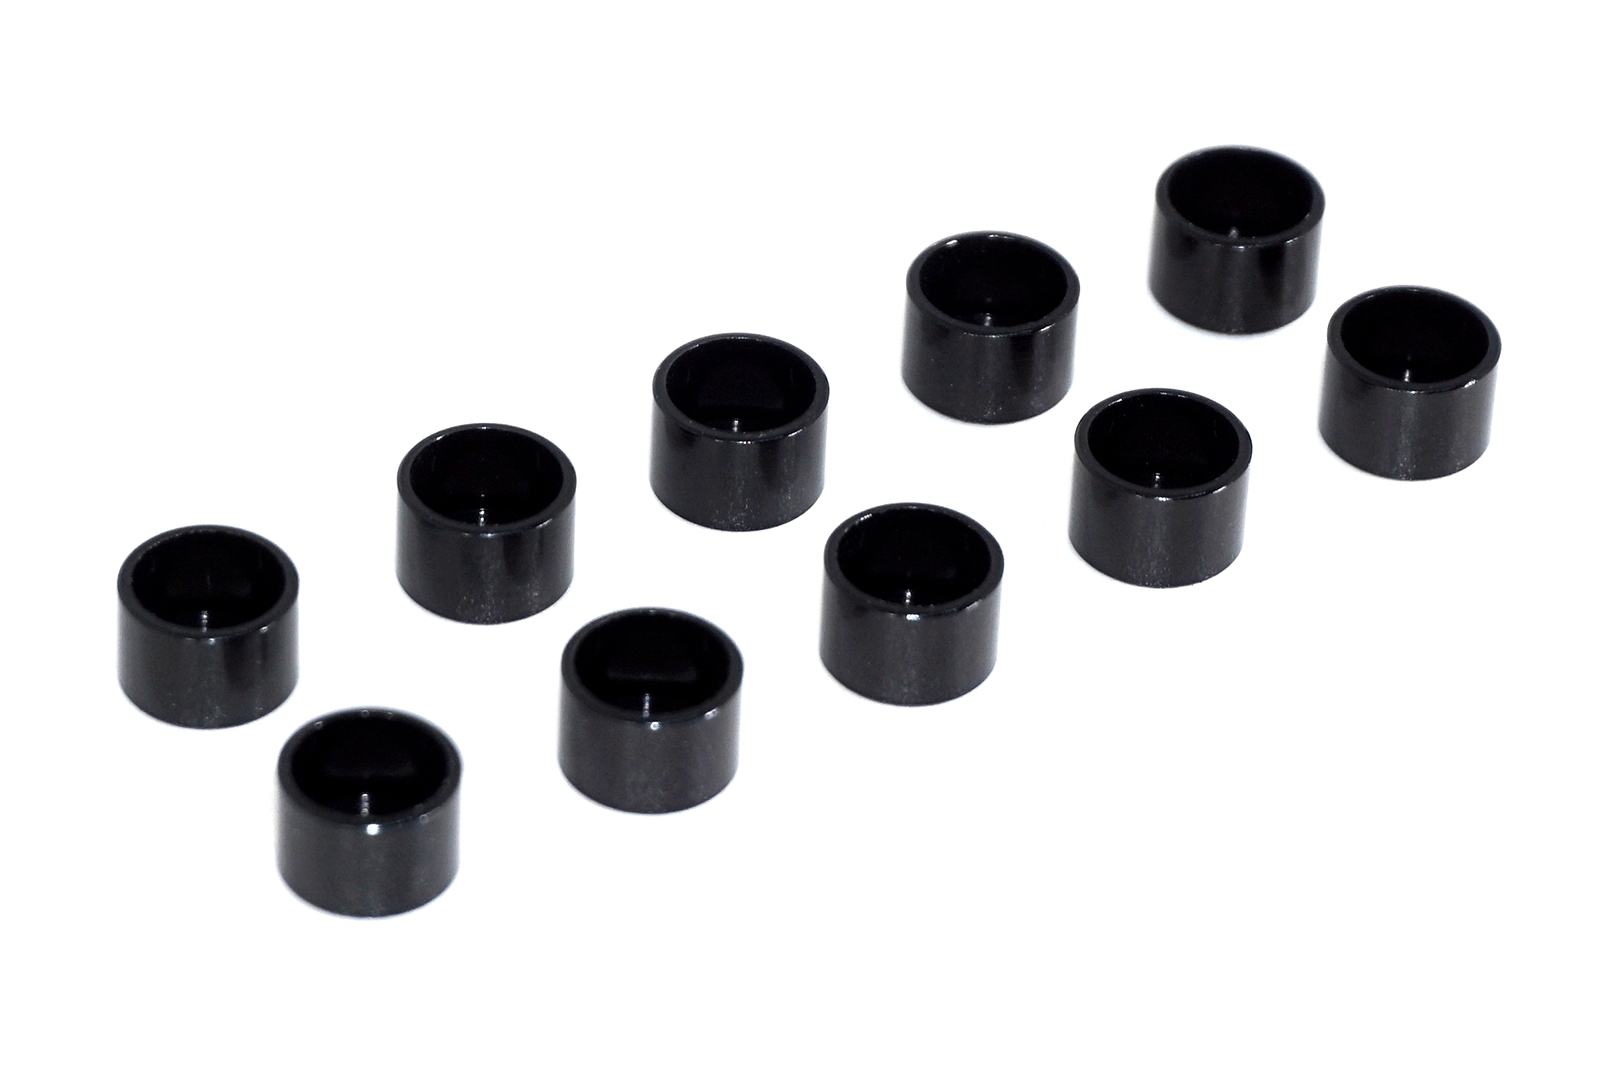 Billet Straight Cup Finish Washers for M2 SHSC Socket-Cap Fasteners, 10-Pack ZSPEC Dress Up Bolts Washers Hardware Finish Beauty Anodized Billet